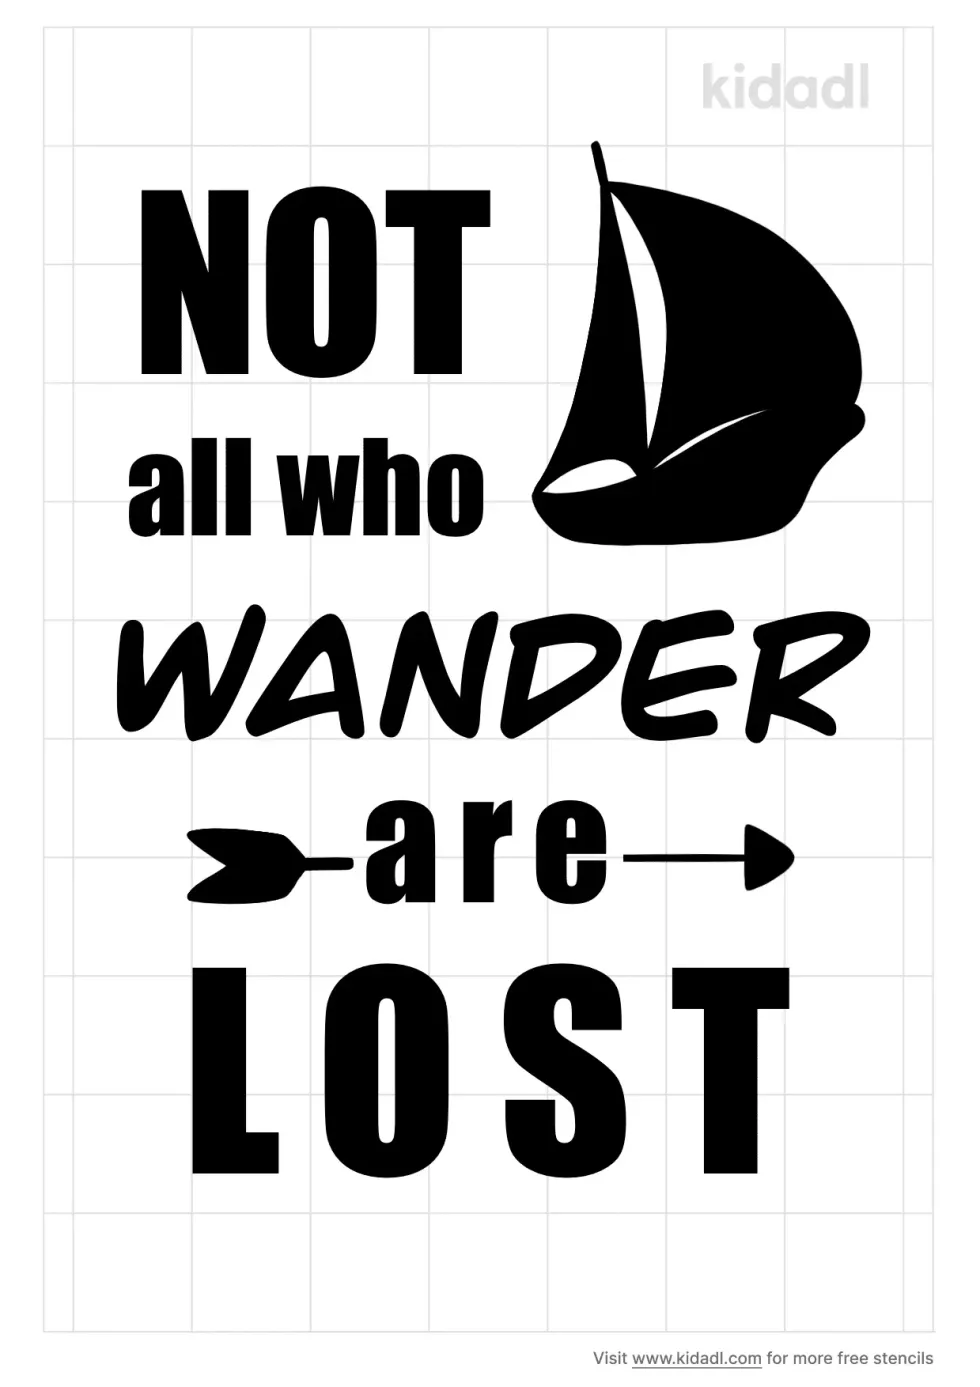 Not All Who Wander Are Lost | Kidadl